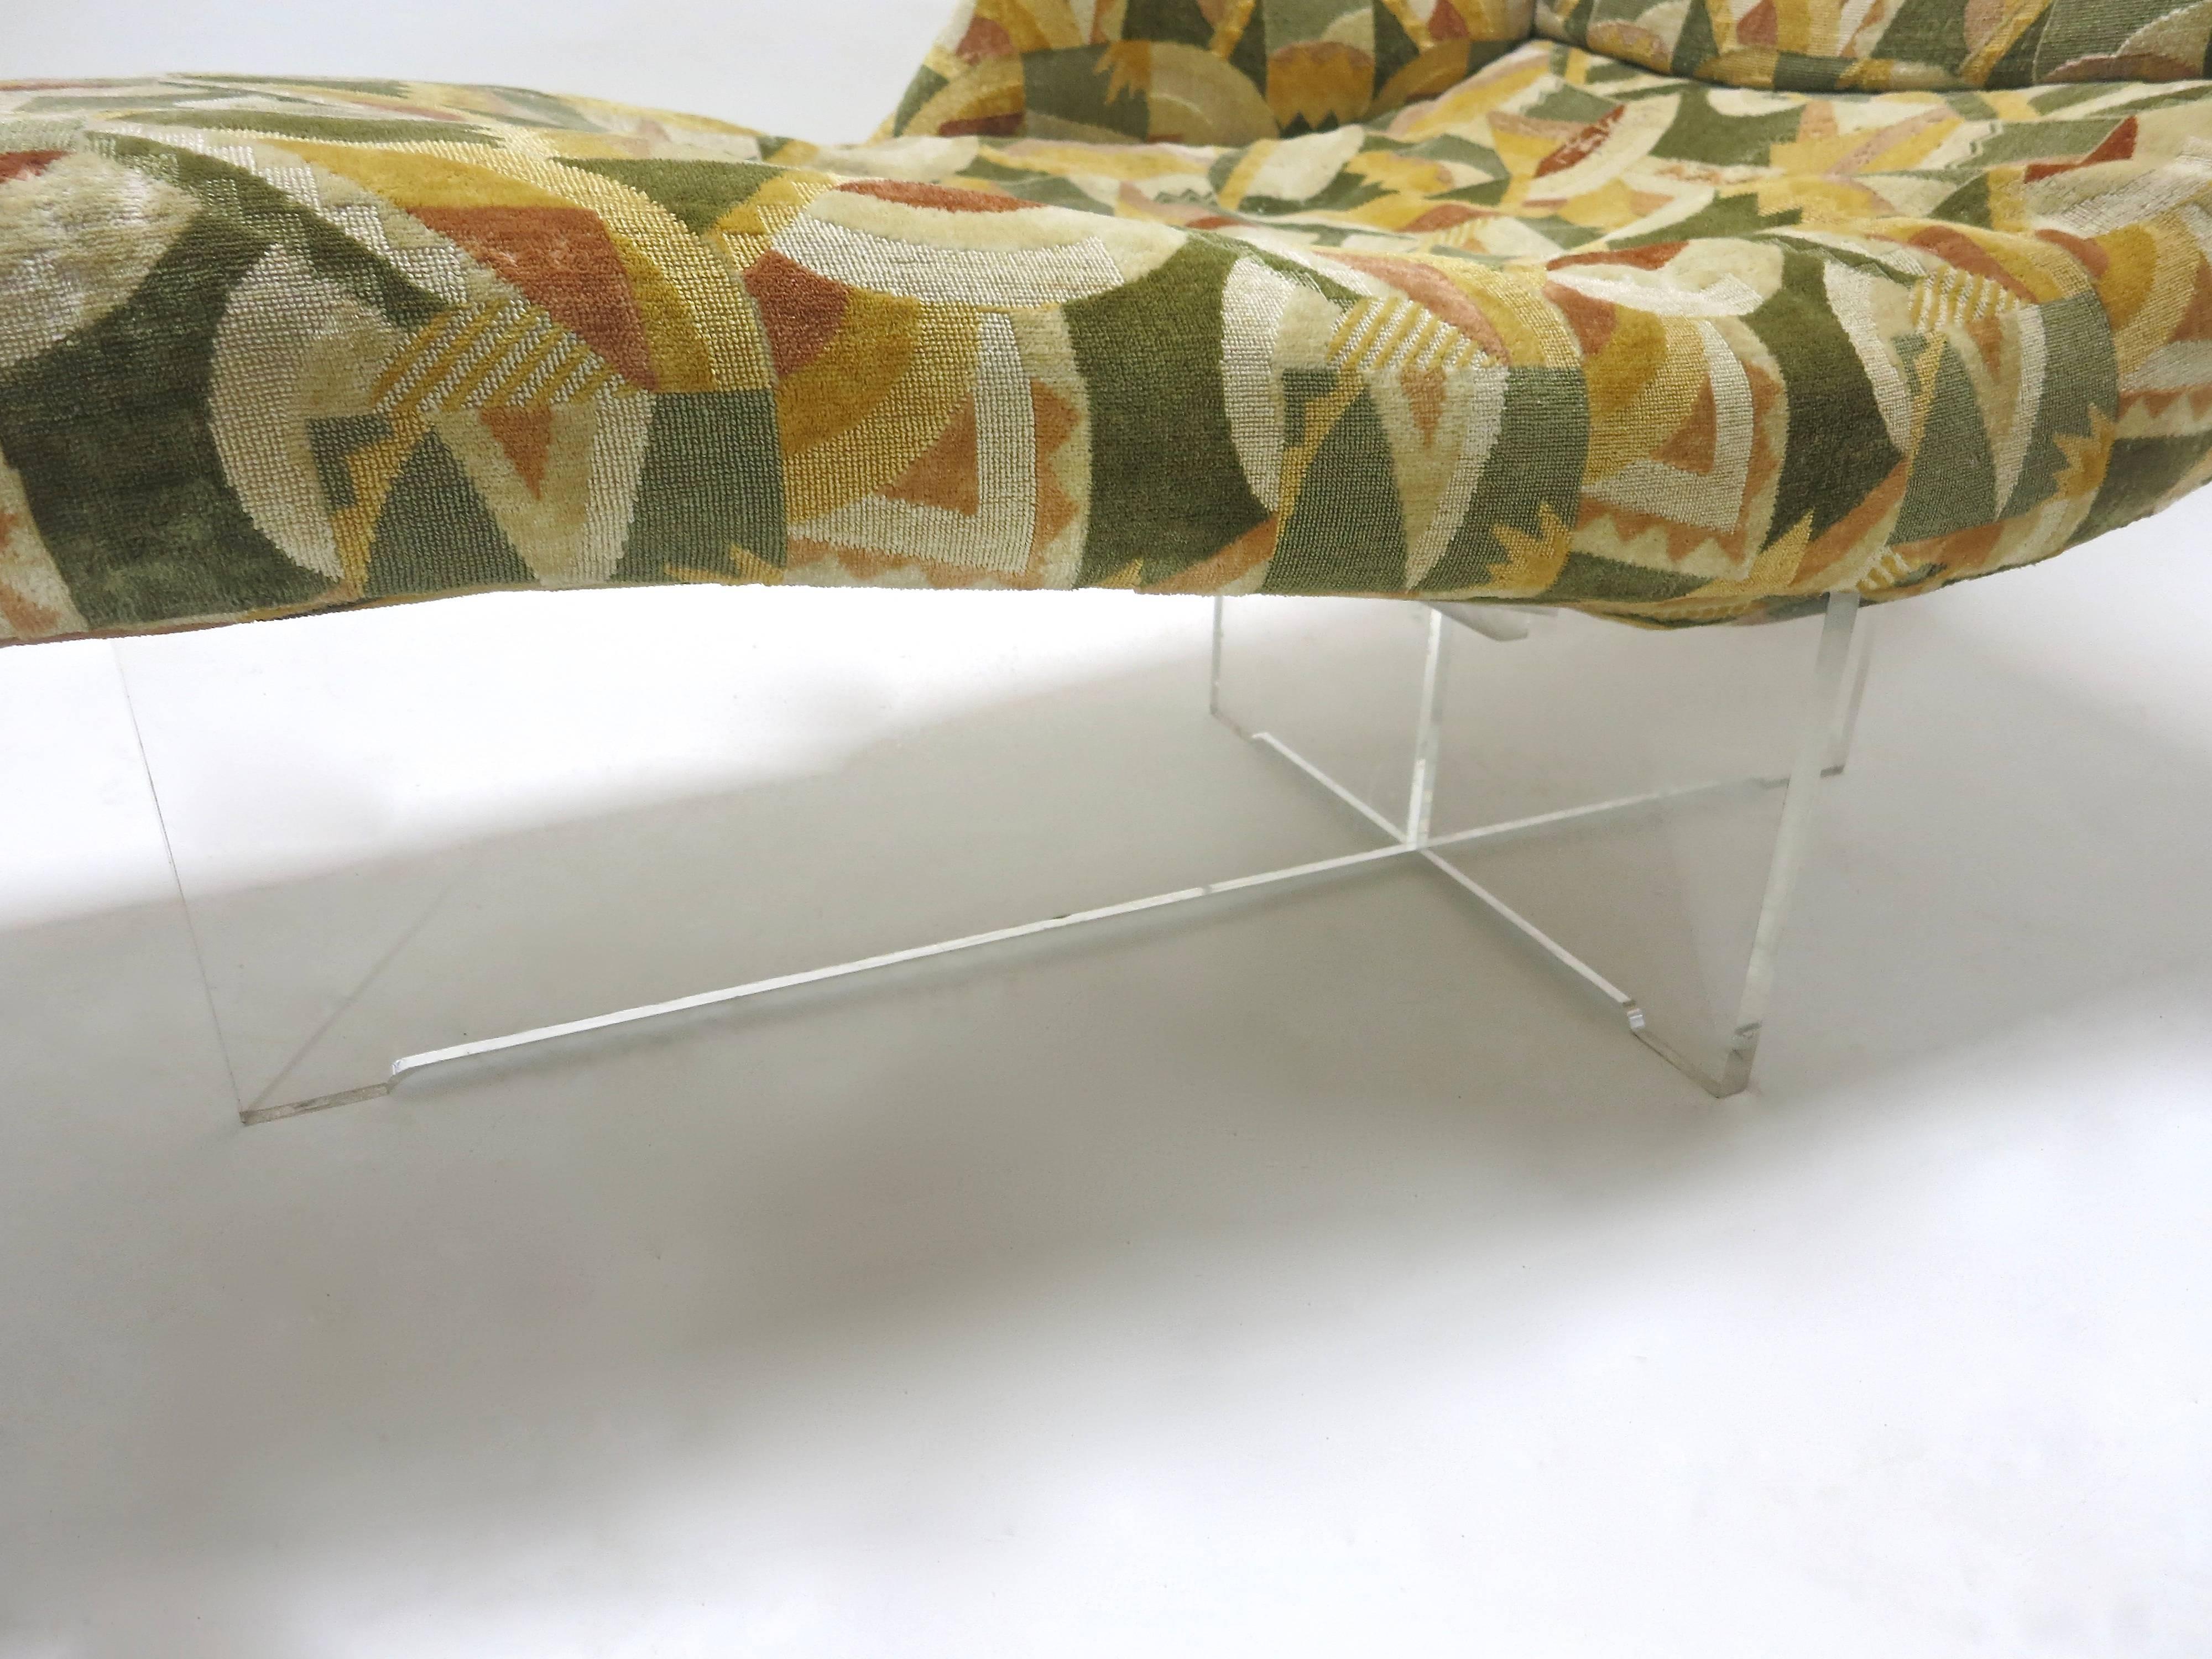 Chaise longue in original condition. A Vladimir Kagan designed in 1969. The chaise has an arm on the rights side with a Lucite base that criss crosses under the seat. The sofa has been kept in near perfect condition with the original fabric.